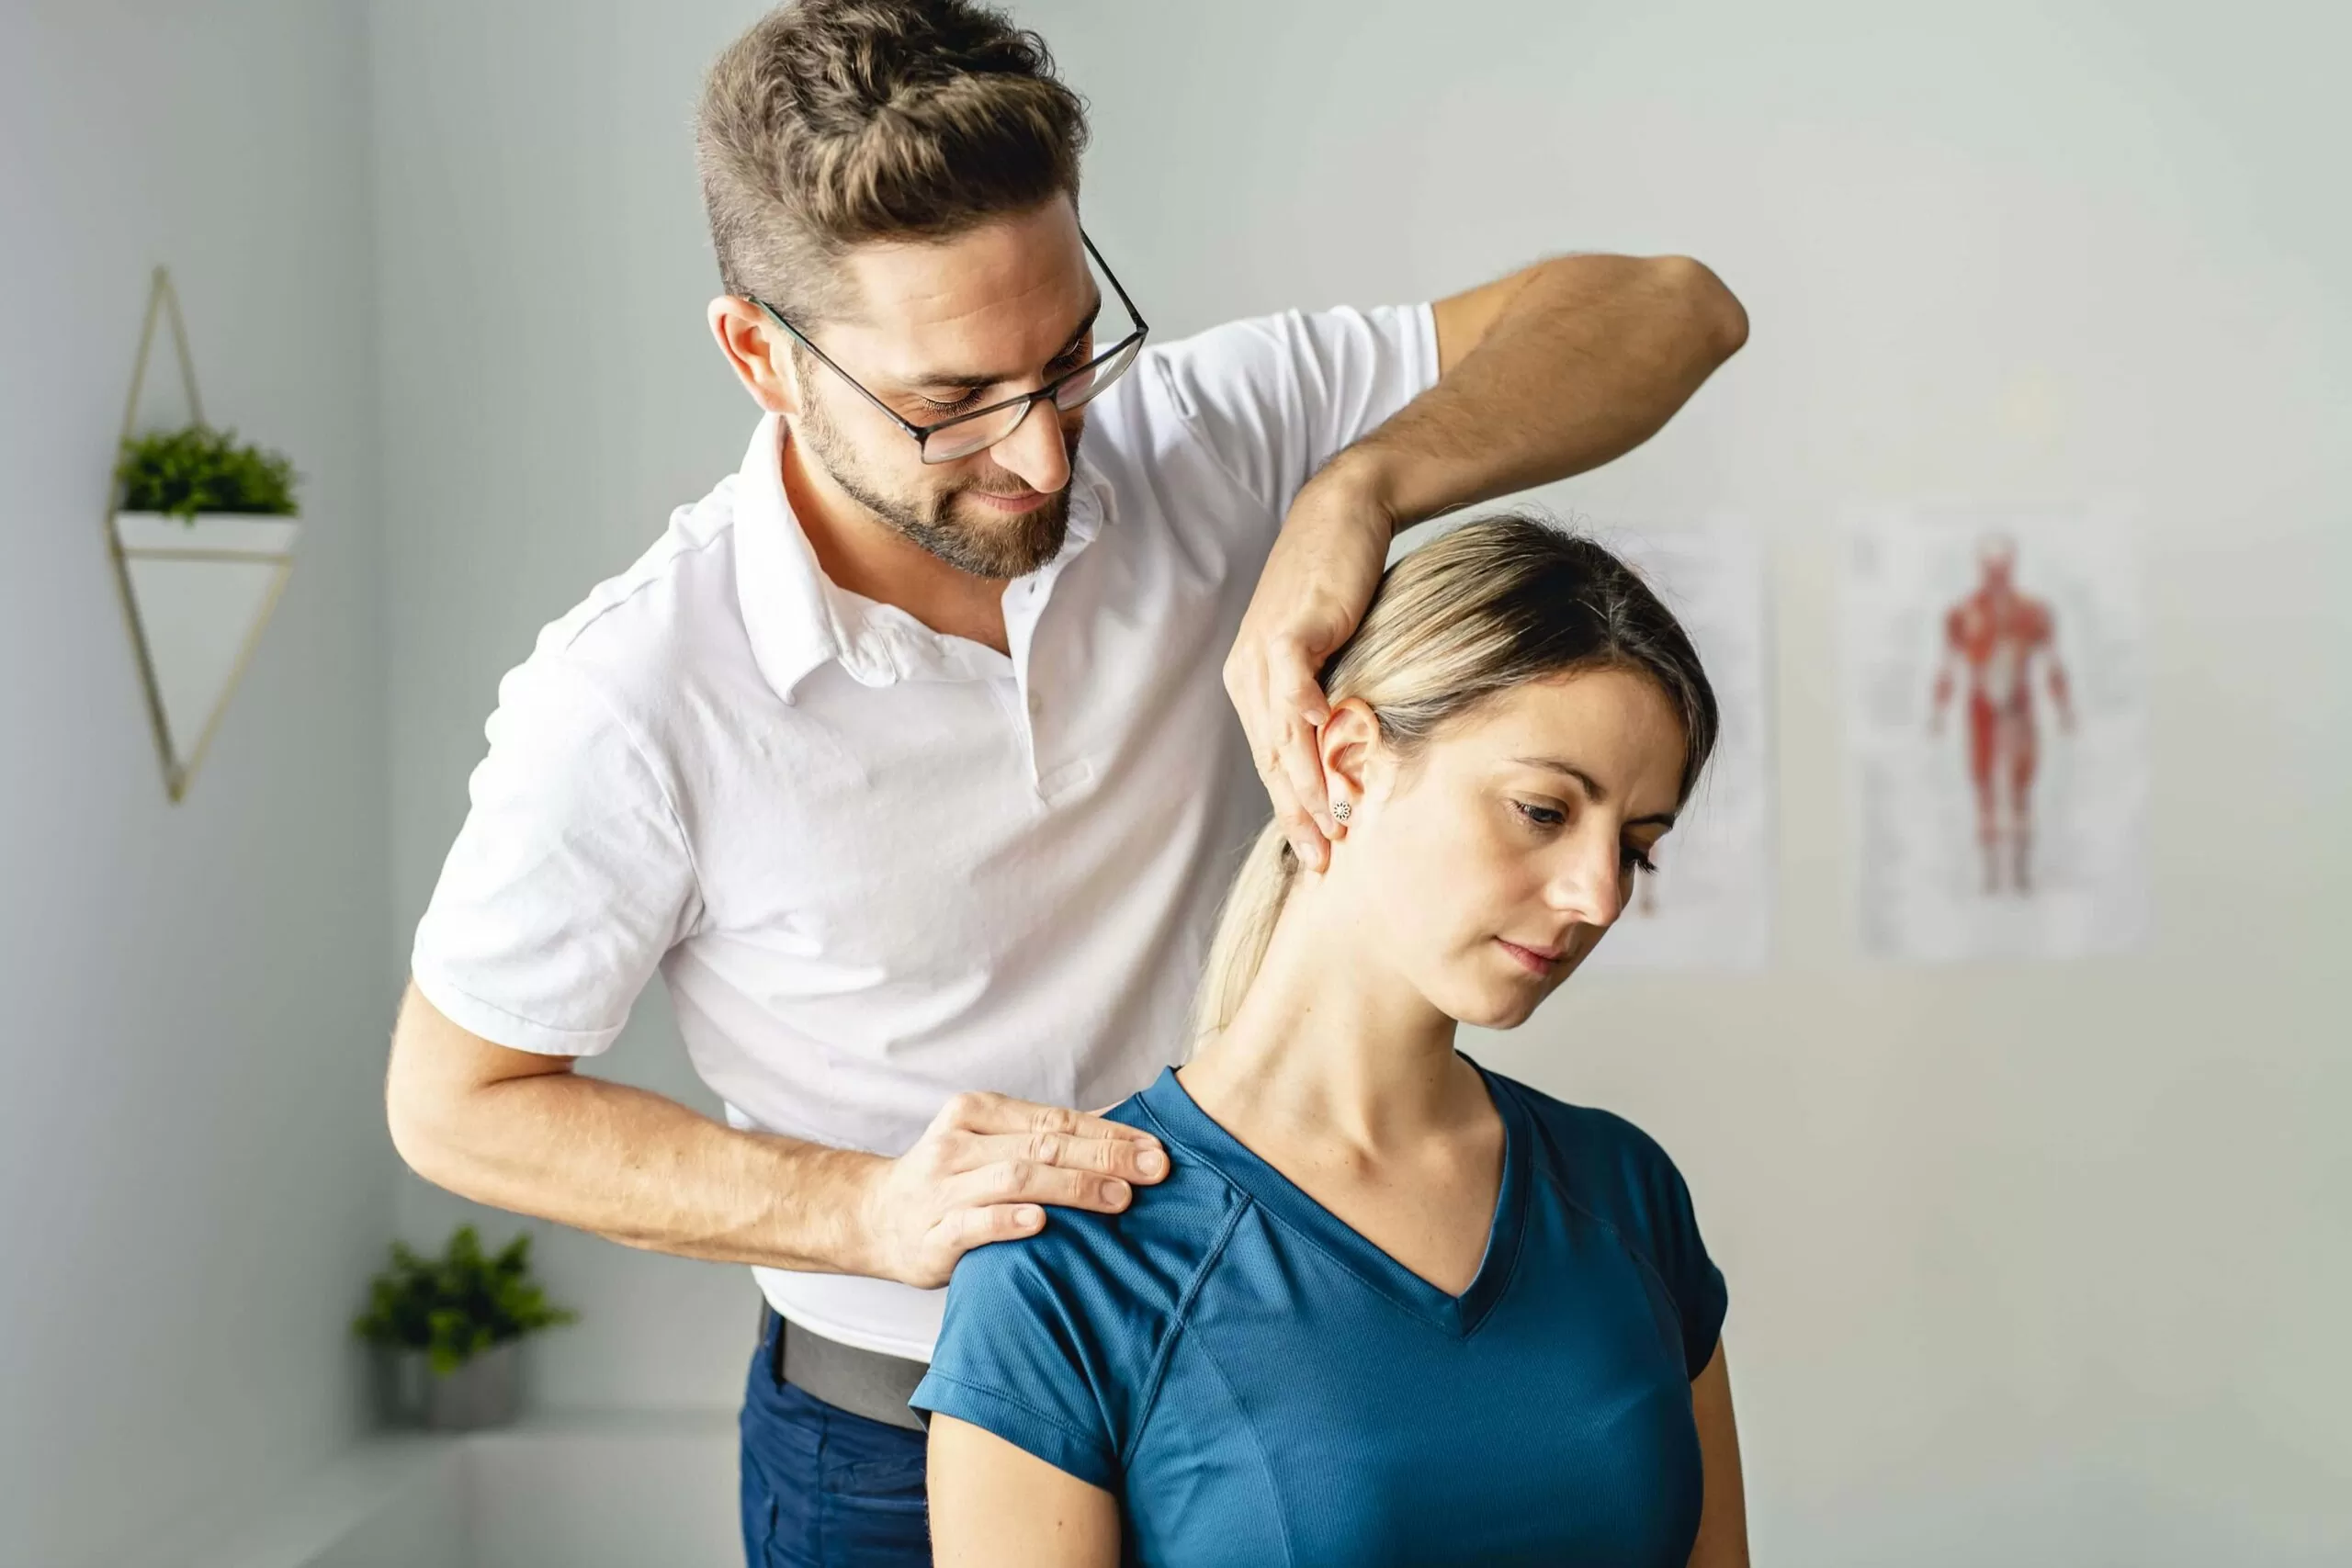 physical therapist treating neck pain on woman